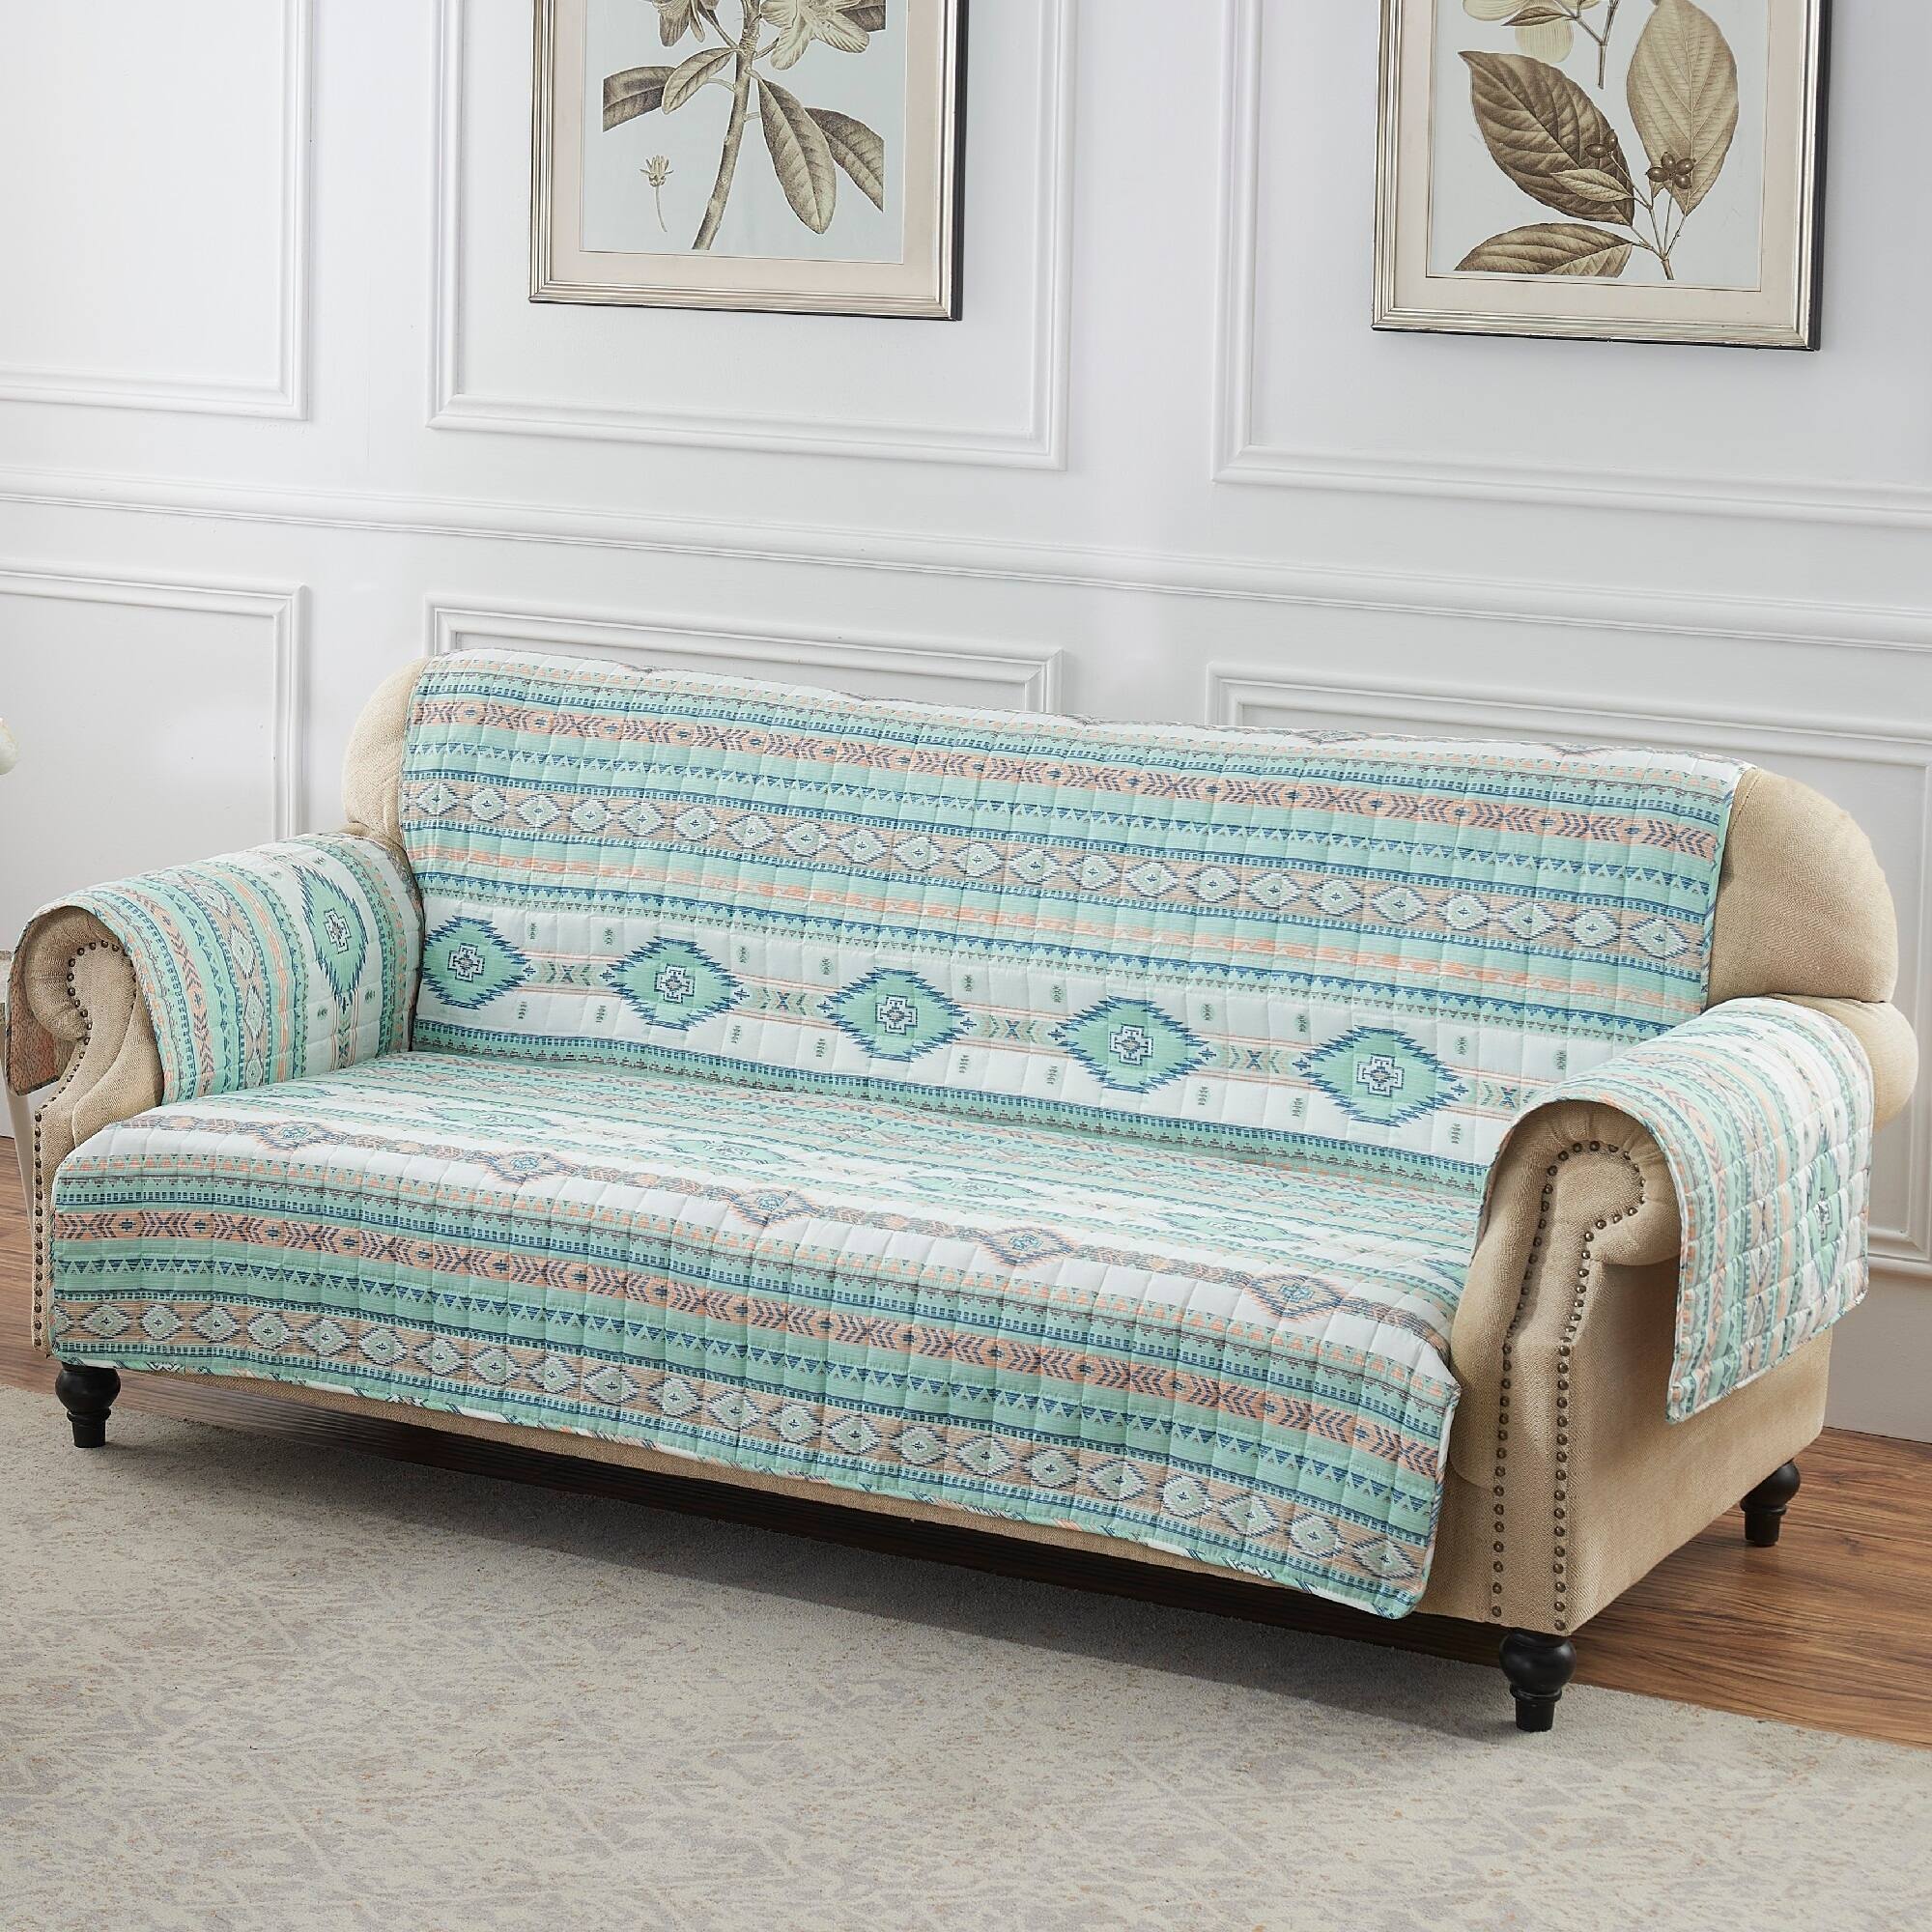    or an eclectic or Navajo print sofa